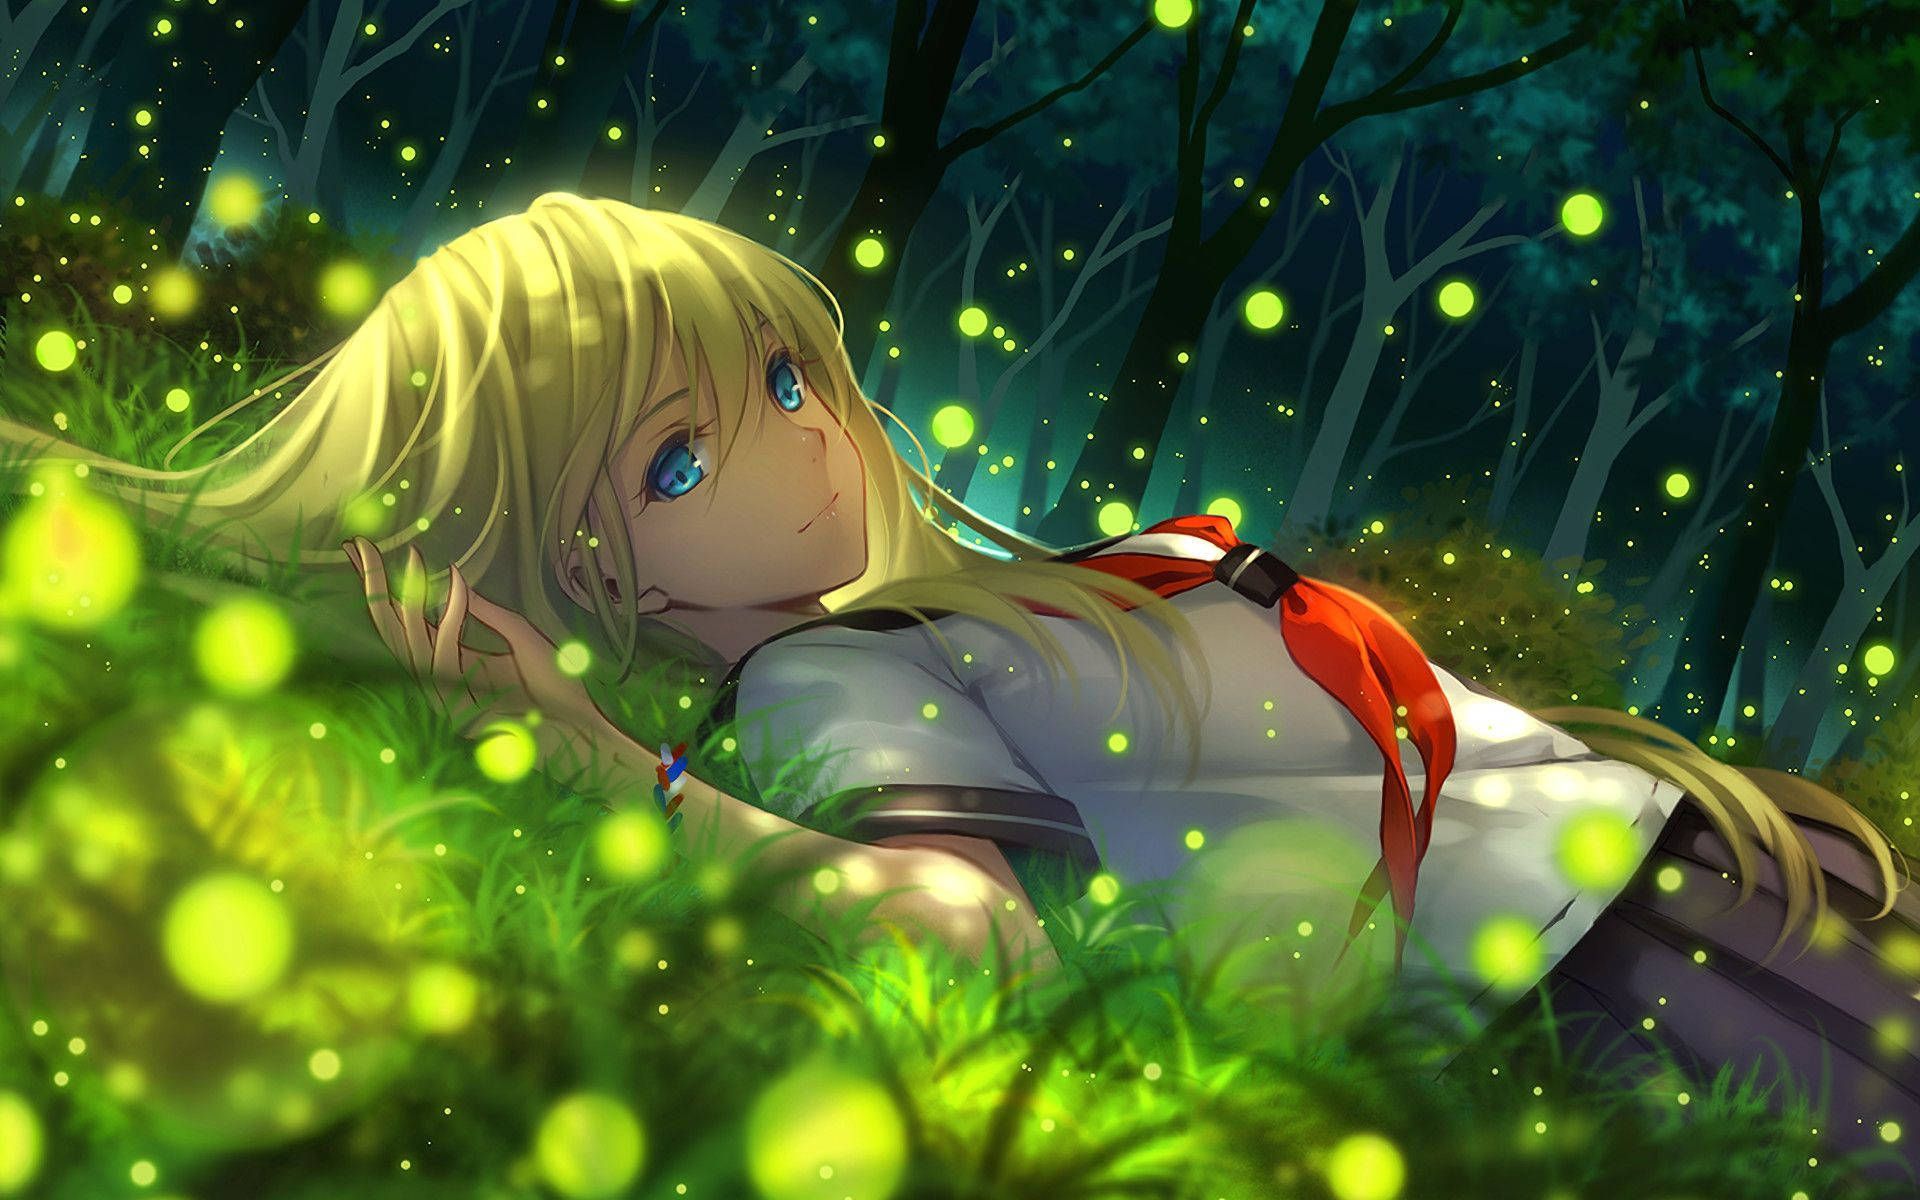 Anime girl laying in the grass with fireflies - Anime